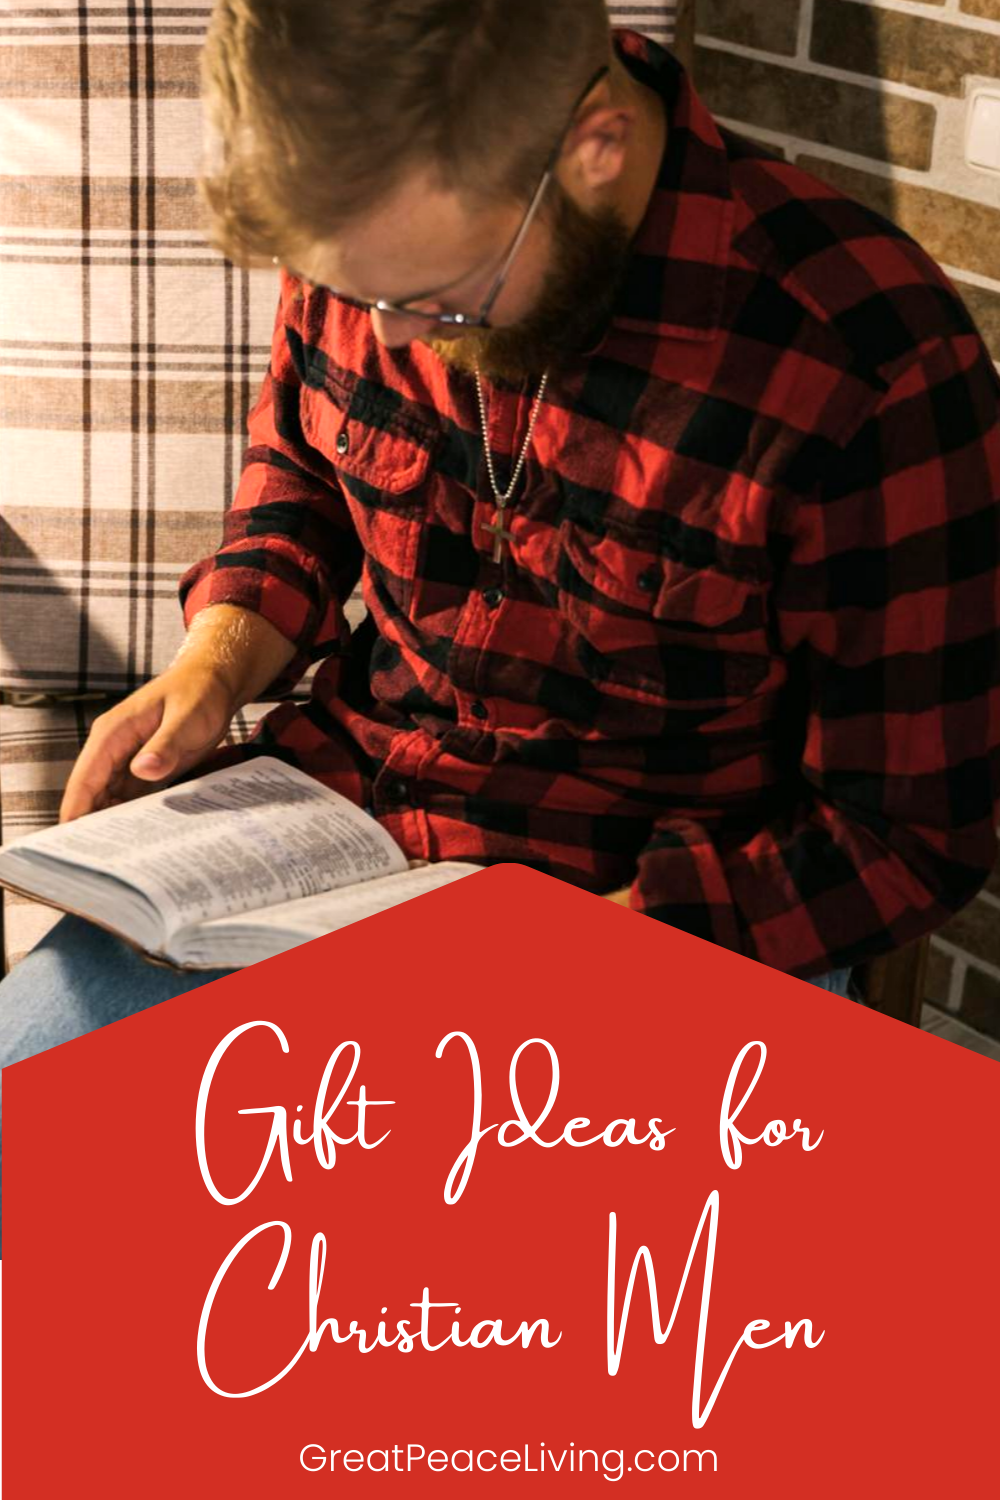 Gifts You Can Give To Christian Men